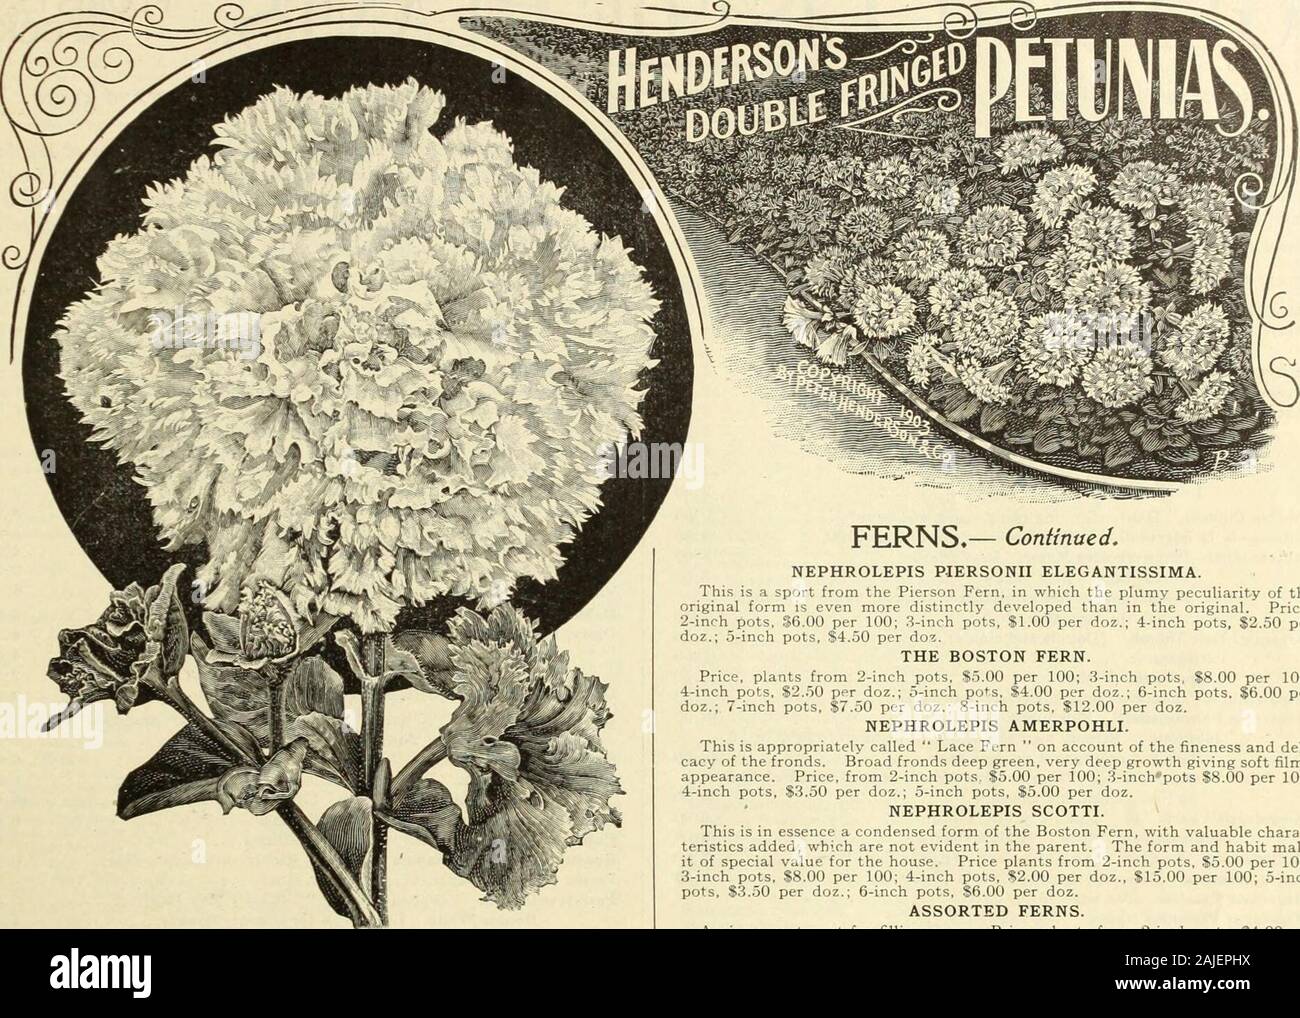 Florists' wholesale catalogue : seeds, bulbs, plants, &c . PETER HENDERSON & CO., NEW YORK.—WHOLESALE CATALOGUE.—PLANTS. 21. NEW DOUBLEFRINGED PETUNIAS. OUR STELLAR COLLECTION FOR 1911. Aldebaran. Delicate lavender pink, deeper in the center with darker veins. Distinctive, pleasing and novel.Algol. Deep and lustrous carmine,rose, fringed petals, violet veins.Altair. Deep violet crimson tipped with pearly white, compact form. fringed. Splendid coloring and fine flowers.Antares. Clear white with purple and crimson shades in center, deeply frir Very distinct in color, fine form.Arcturus. Dark vio Stock Photo